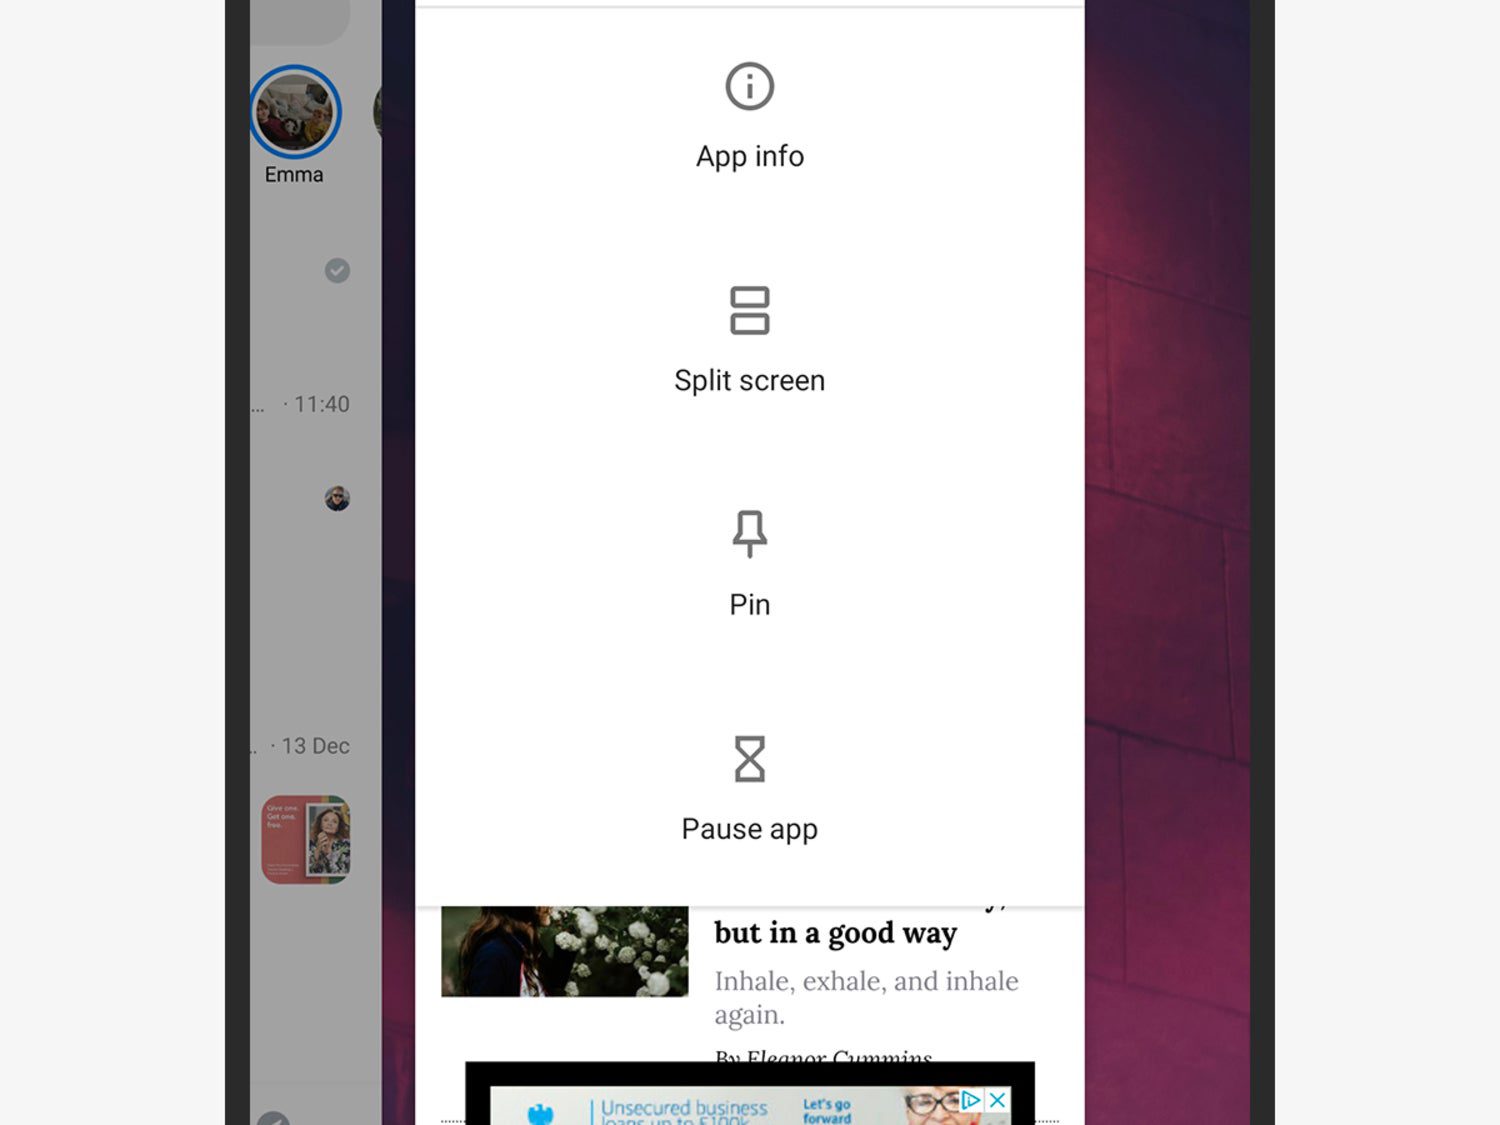 Android's Screen Pinning feature for safely sharing phones.